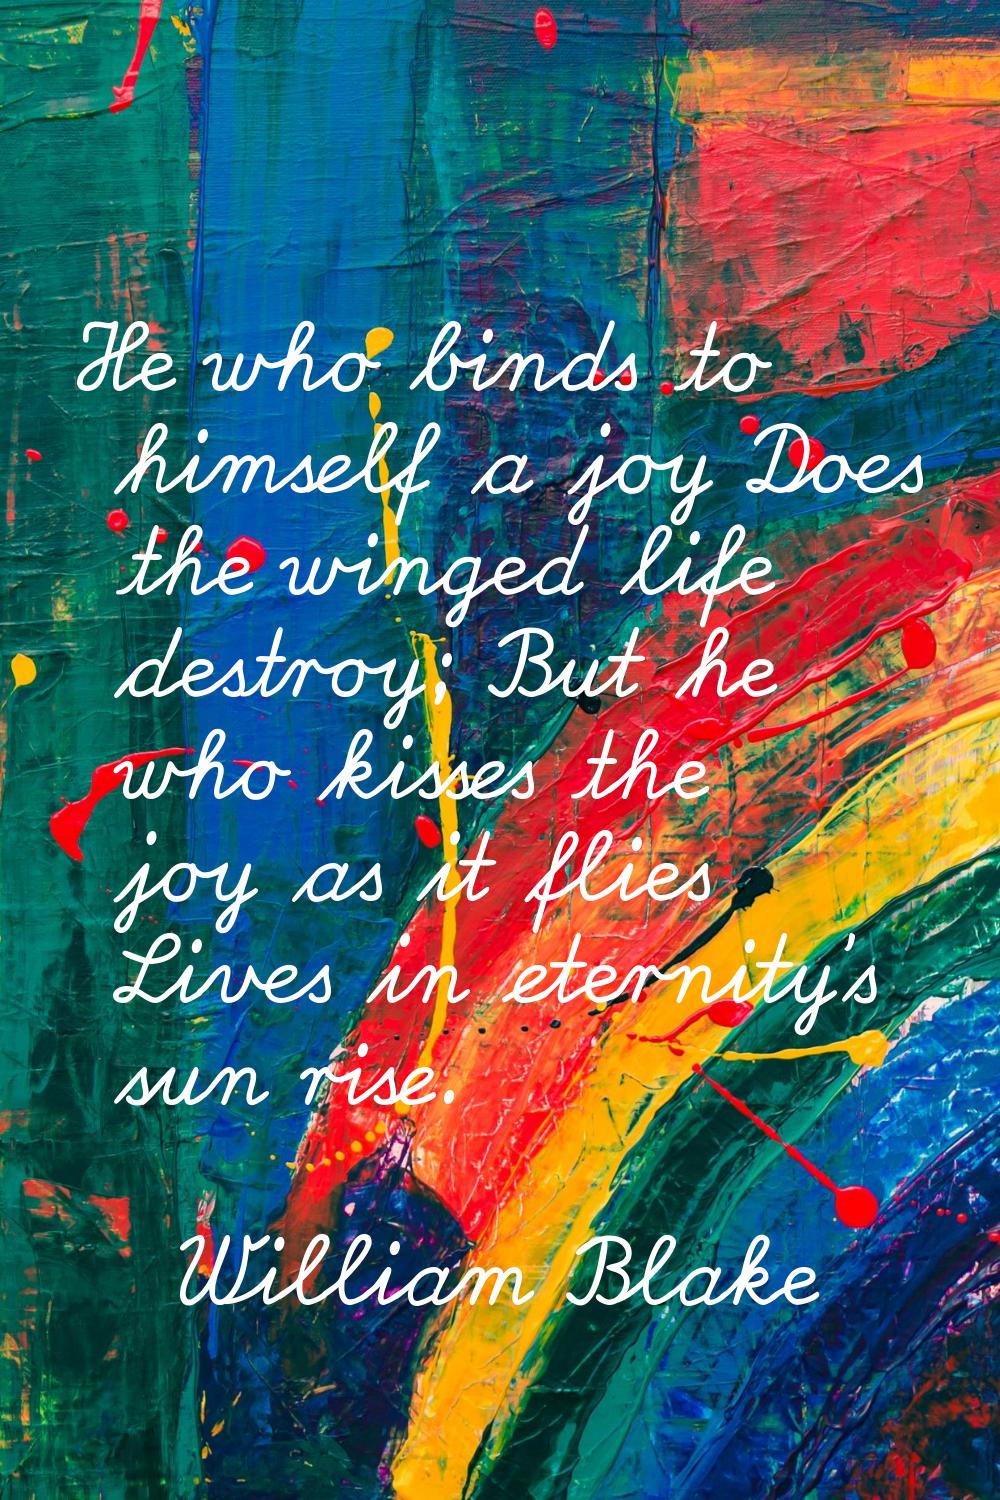 He who binds to himself a joy Does the winged life destroy; But he who kisses the joy as it flies L